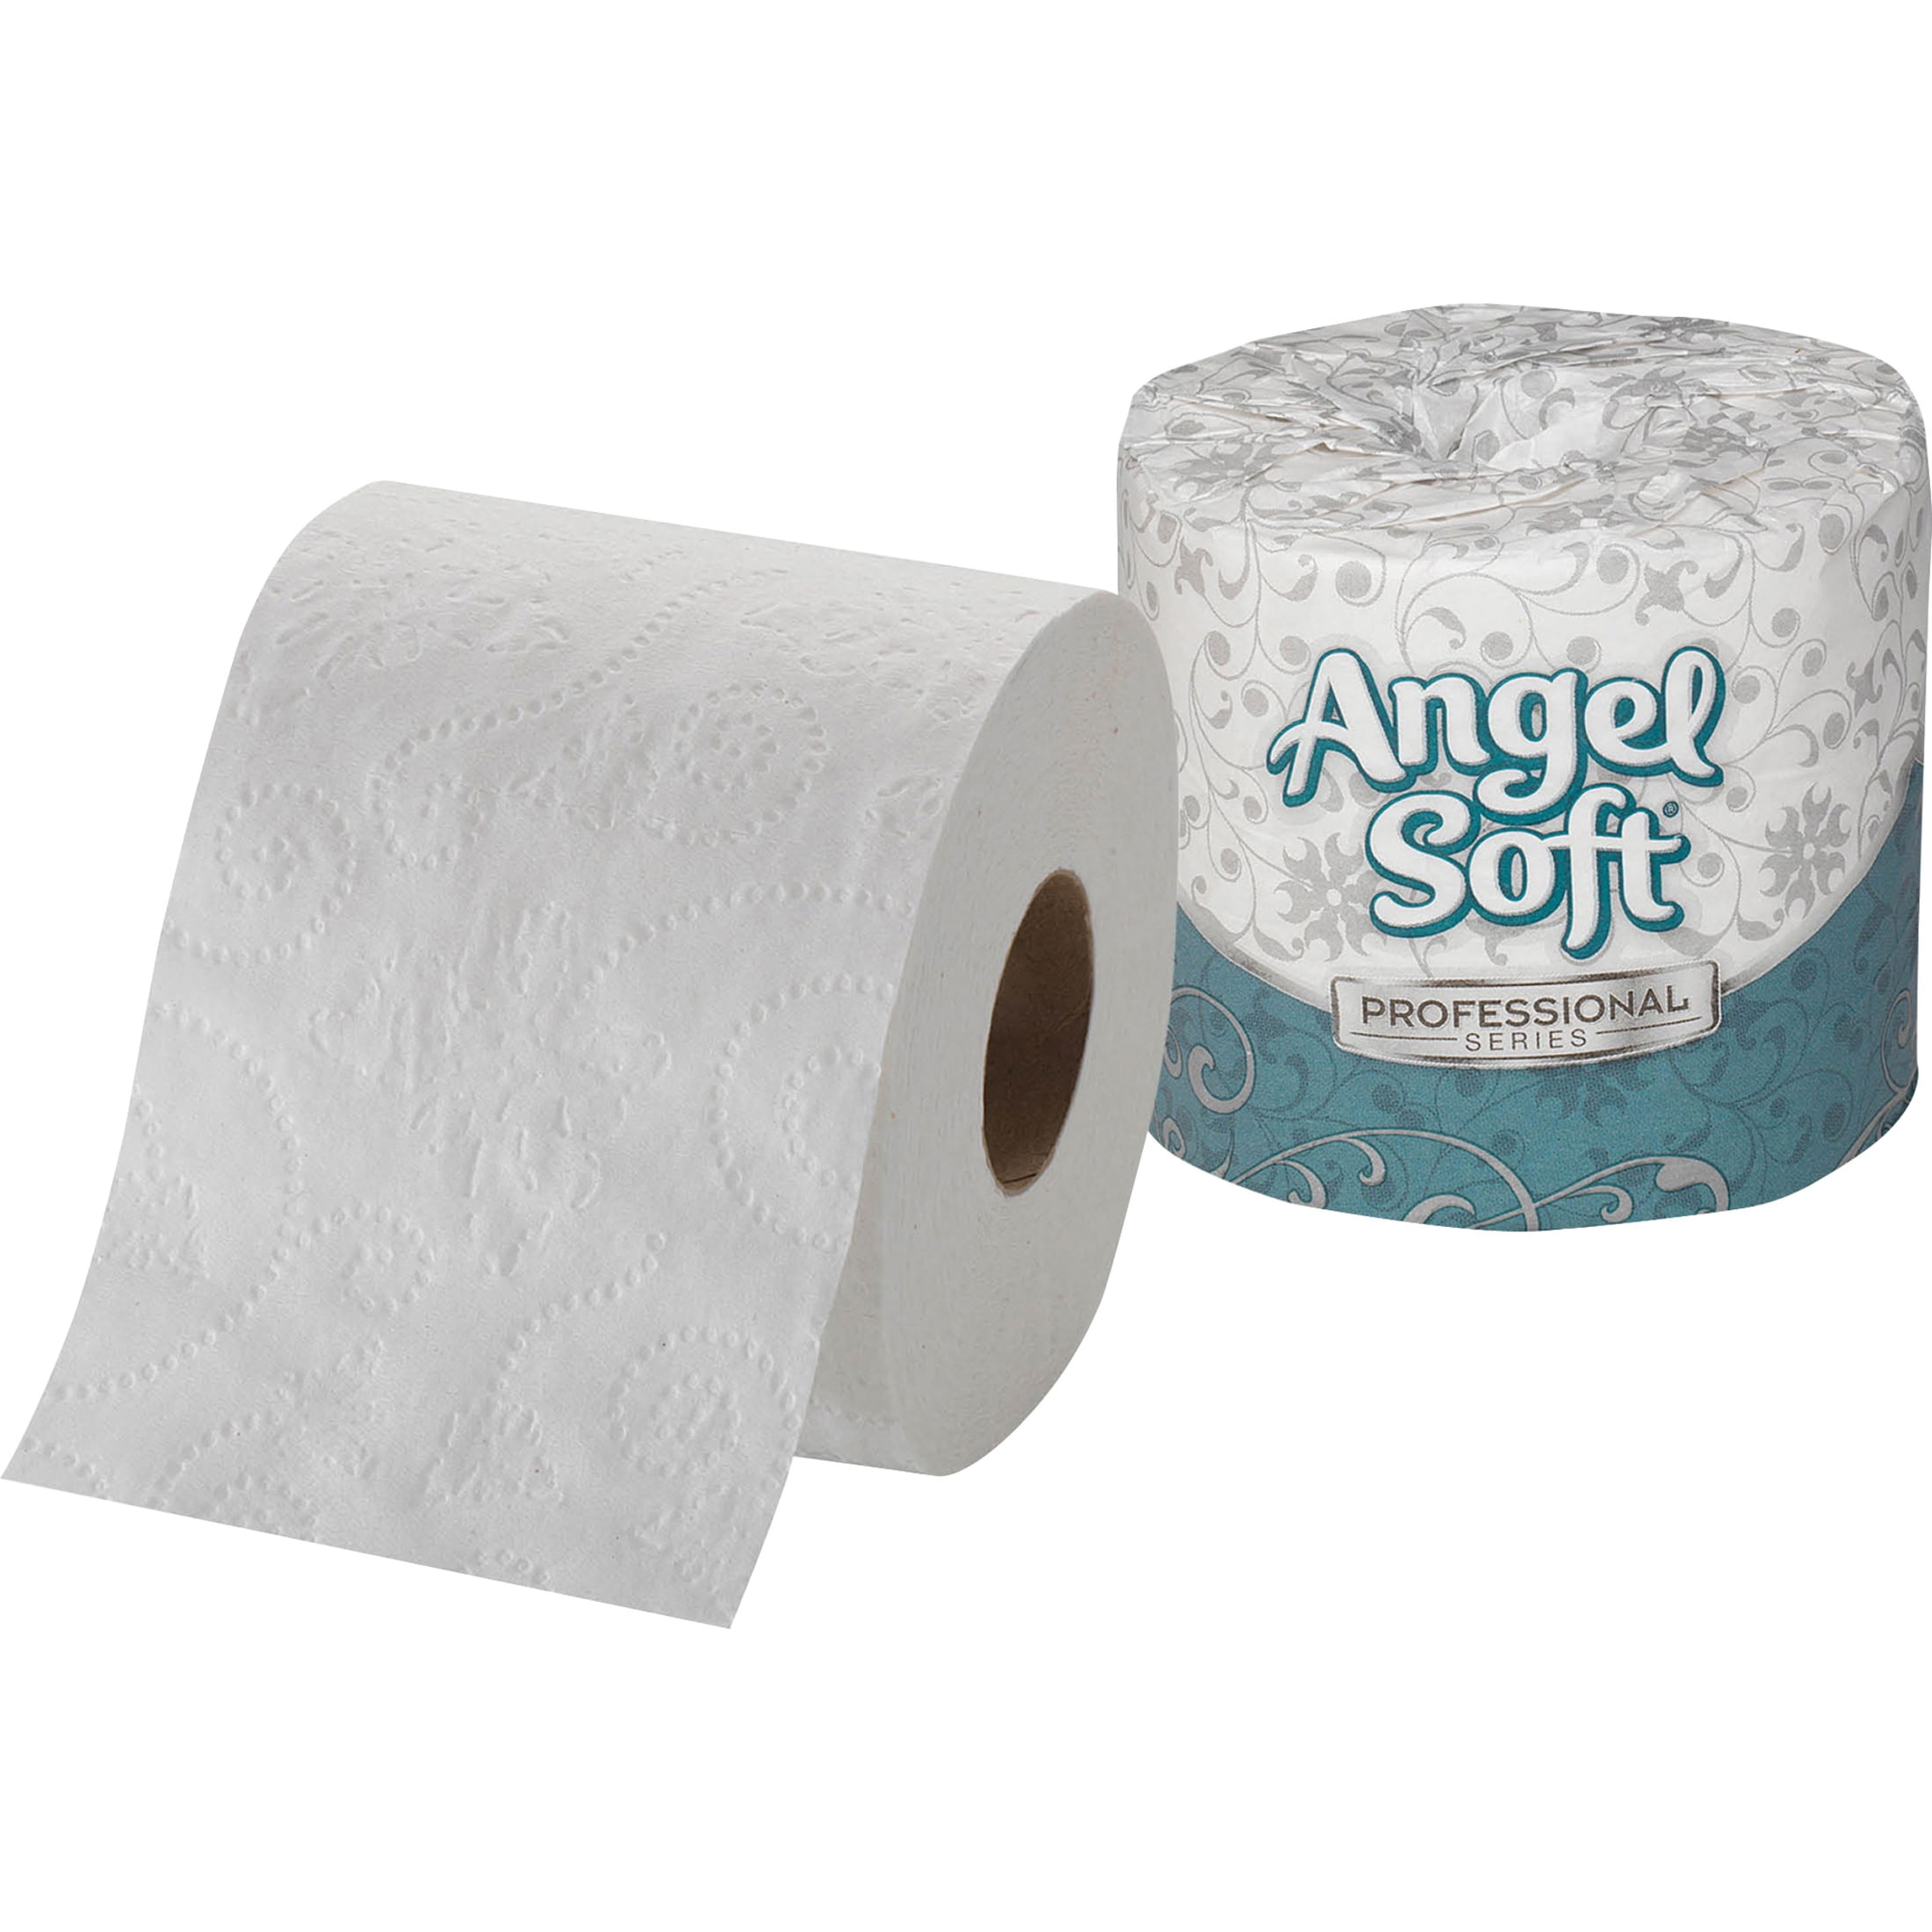 Angel Soft Professional Series, GPC16840, Embossed Toilet Paper, 40 per Carton, White - 3